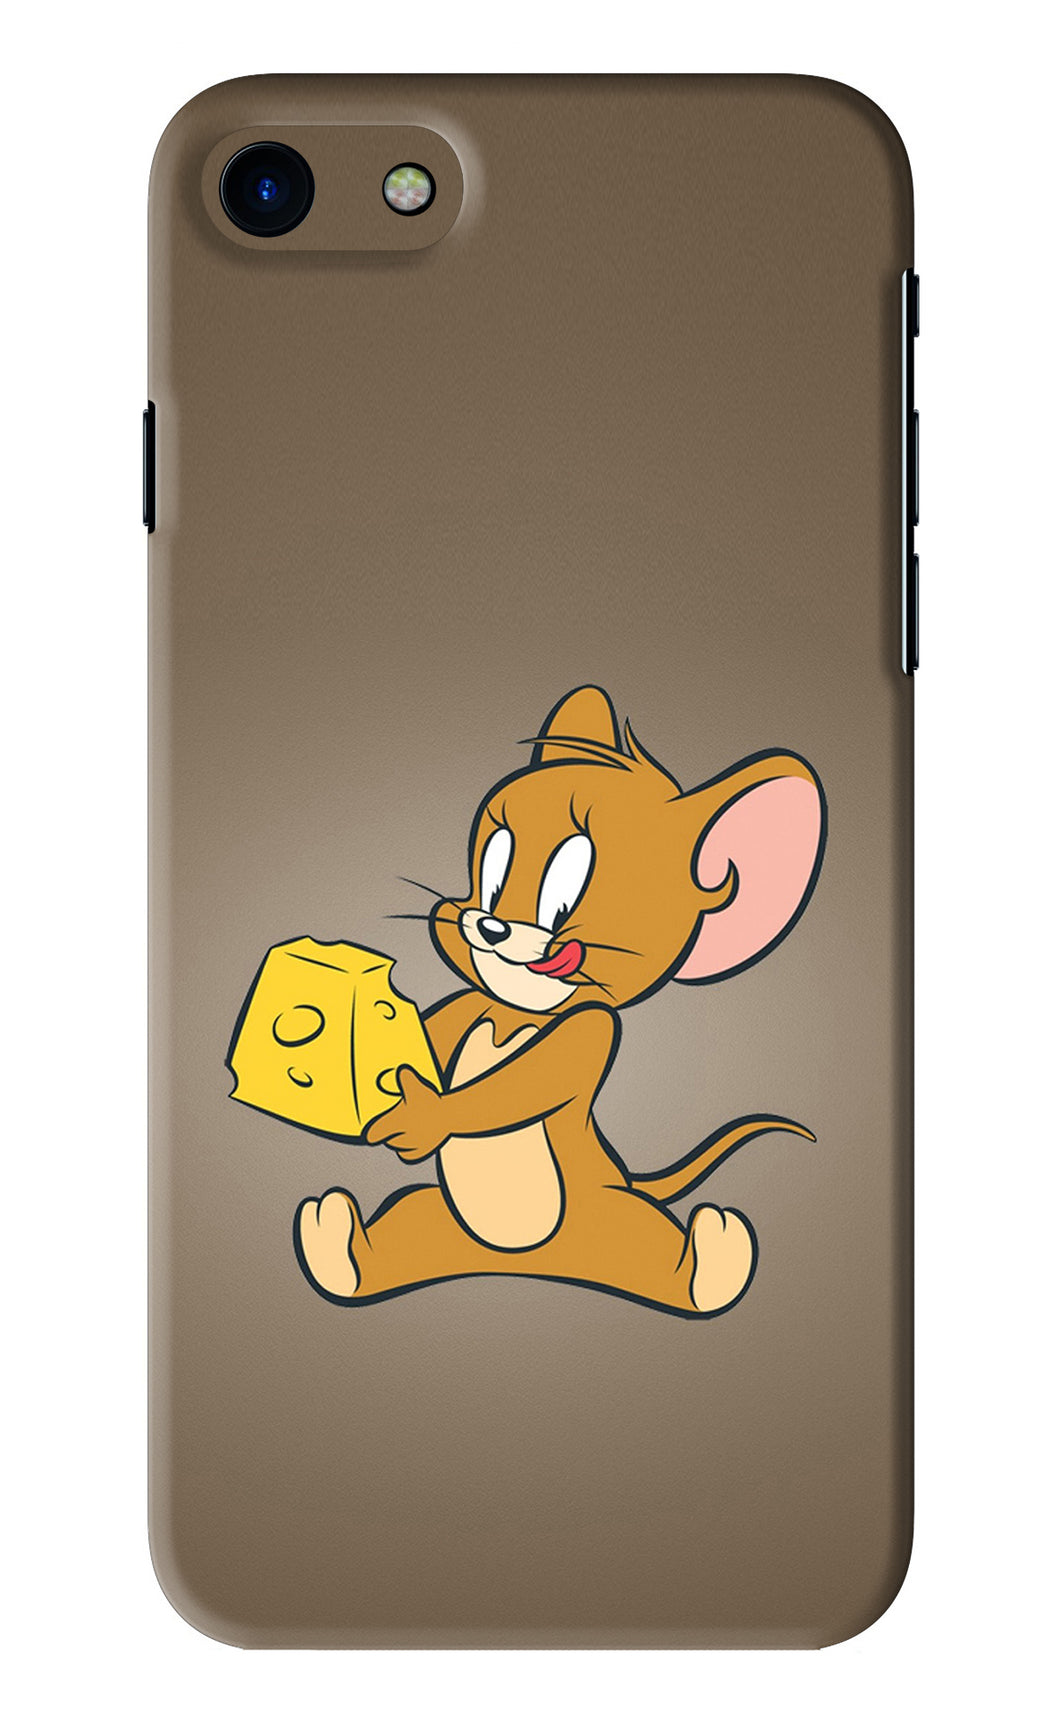 Jerry iPhone 8 Back Skin Wrap